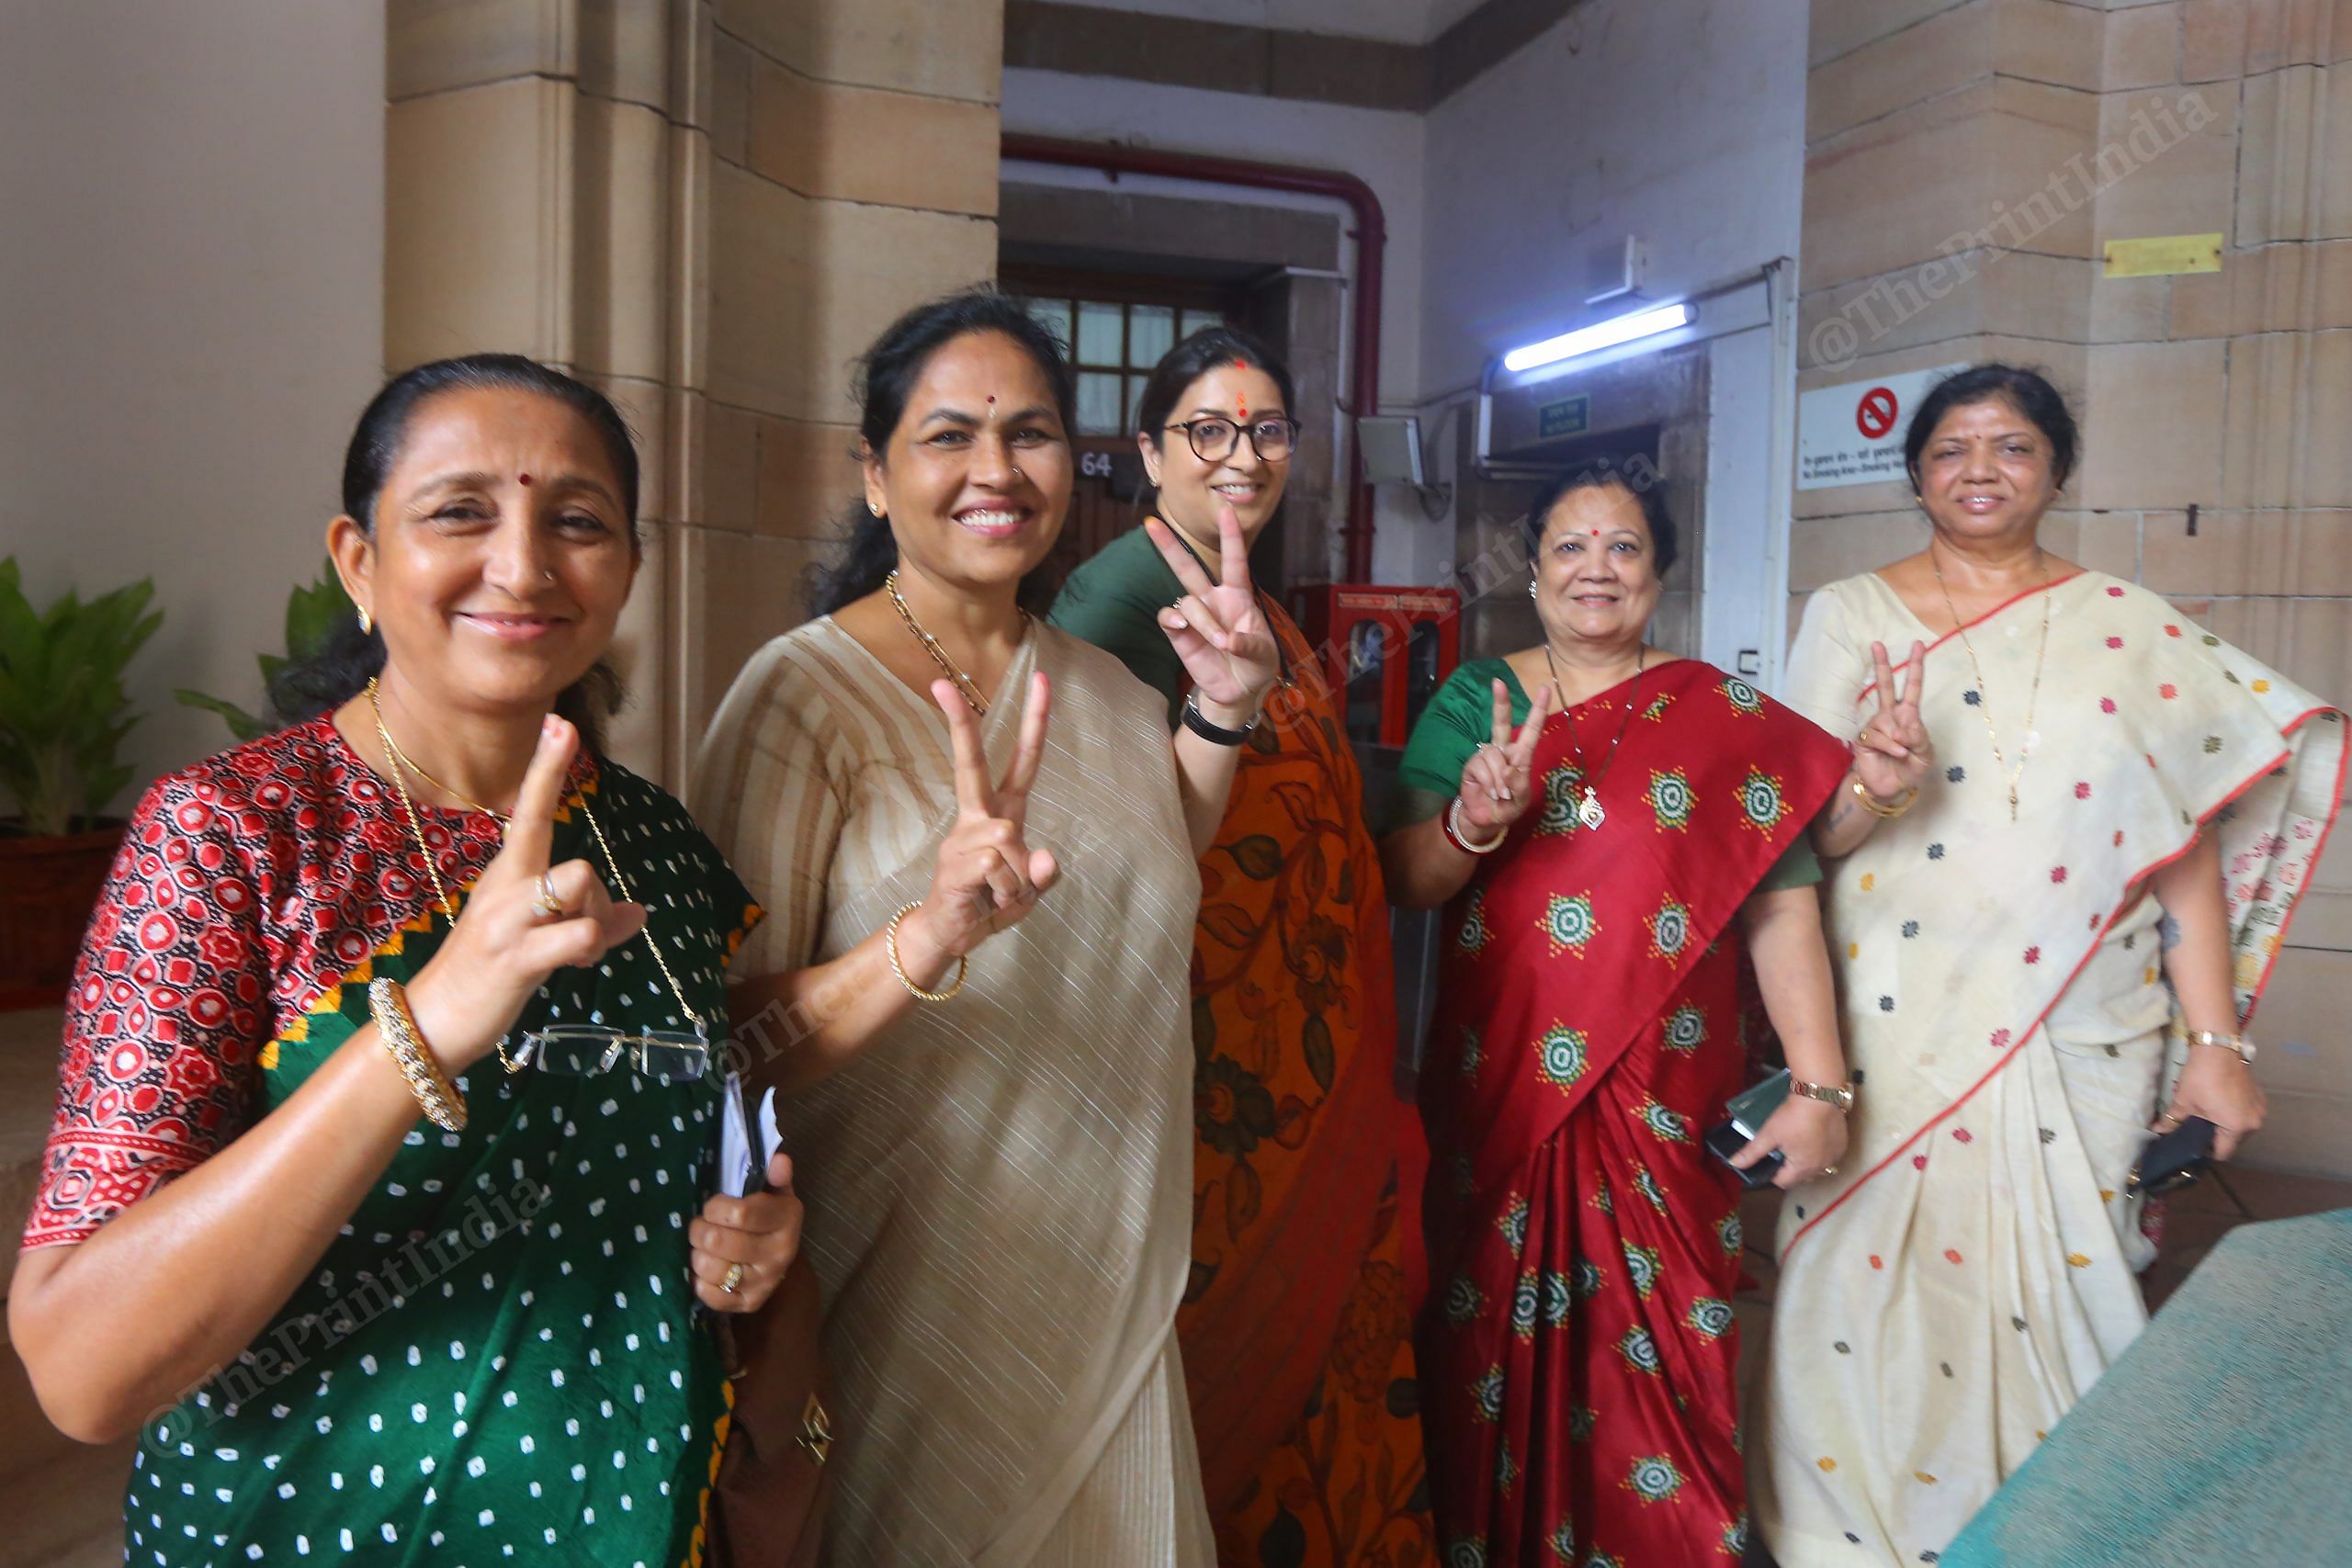 BJP leaders including Smriti Irani shows victory sign after casting vote | Photo: Praveen Jain | ThePrint